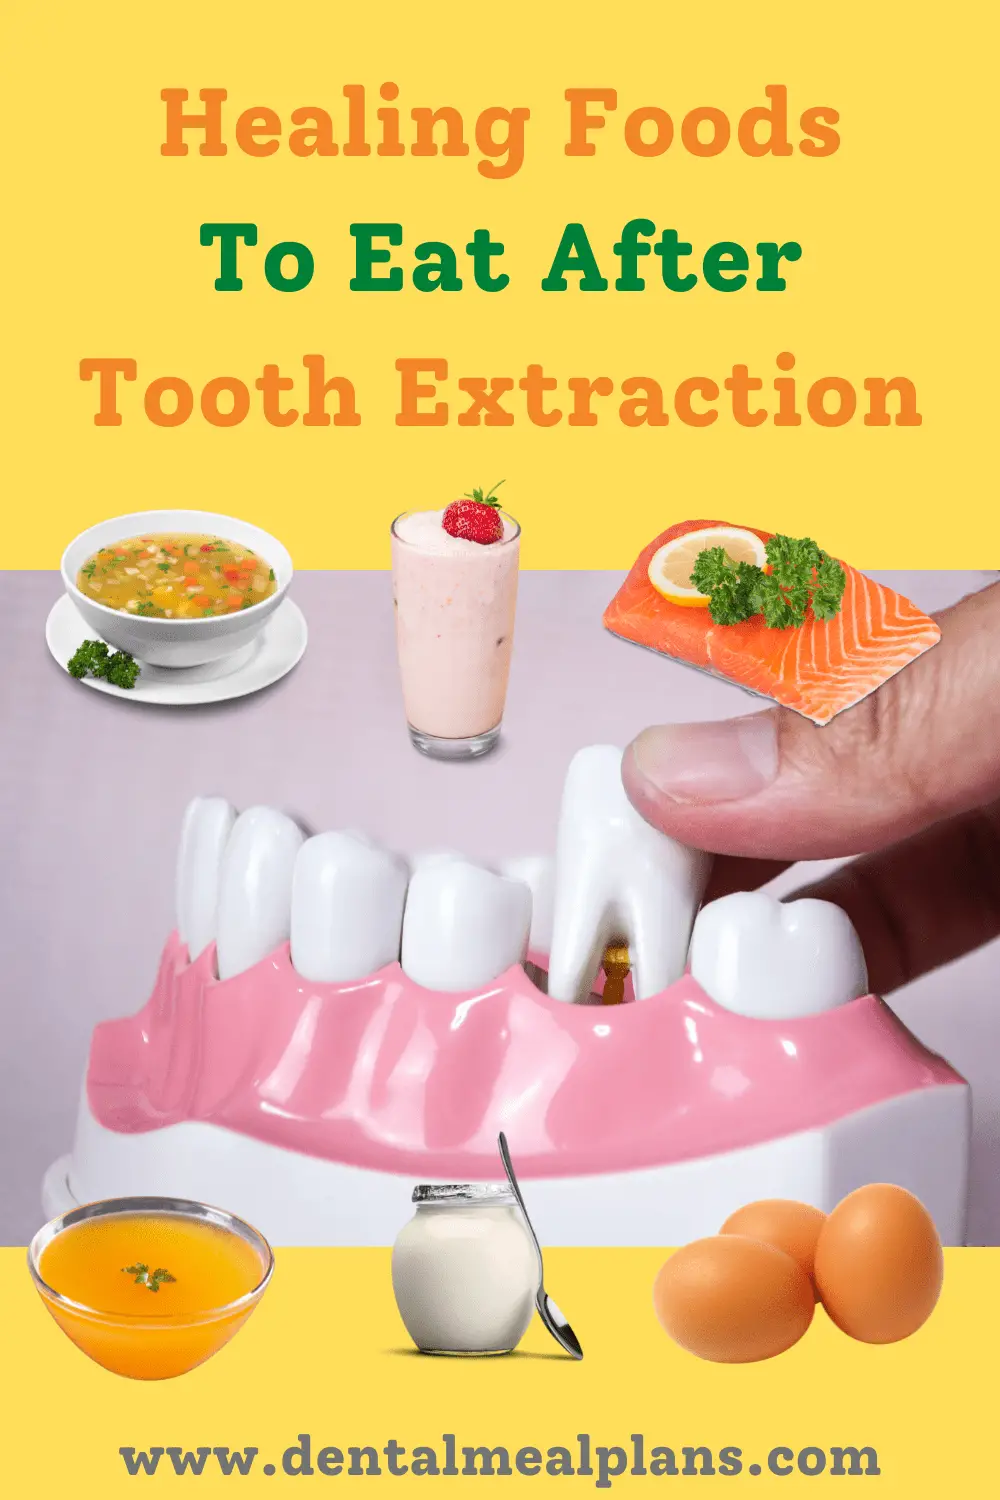 healing foods to eat after tooth extraction image with food examples